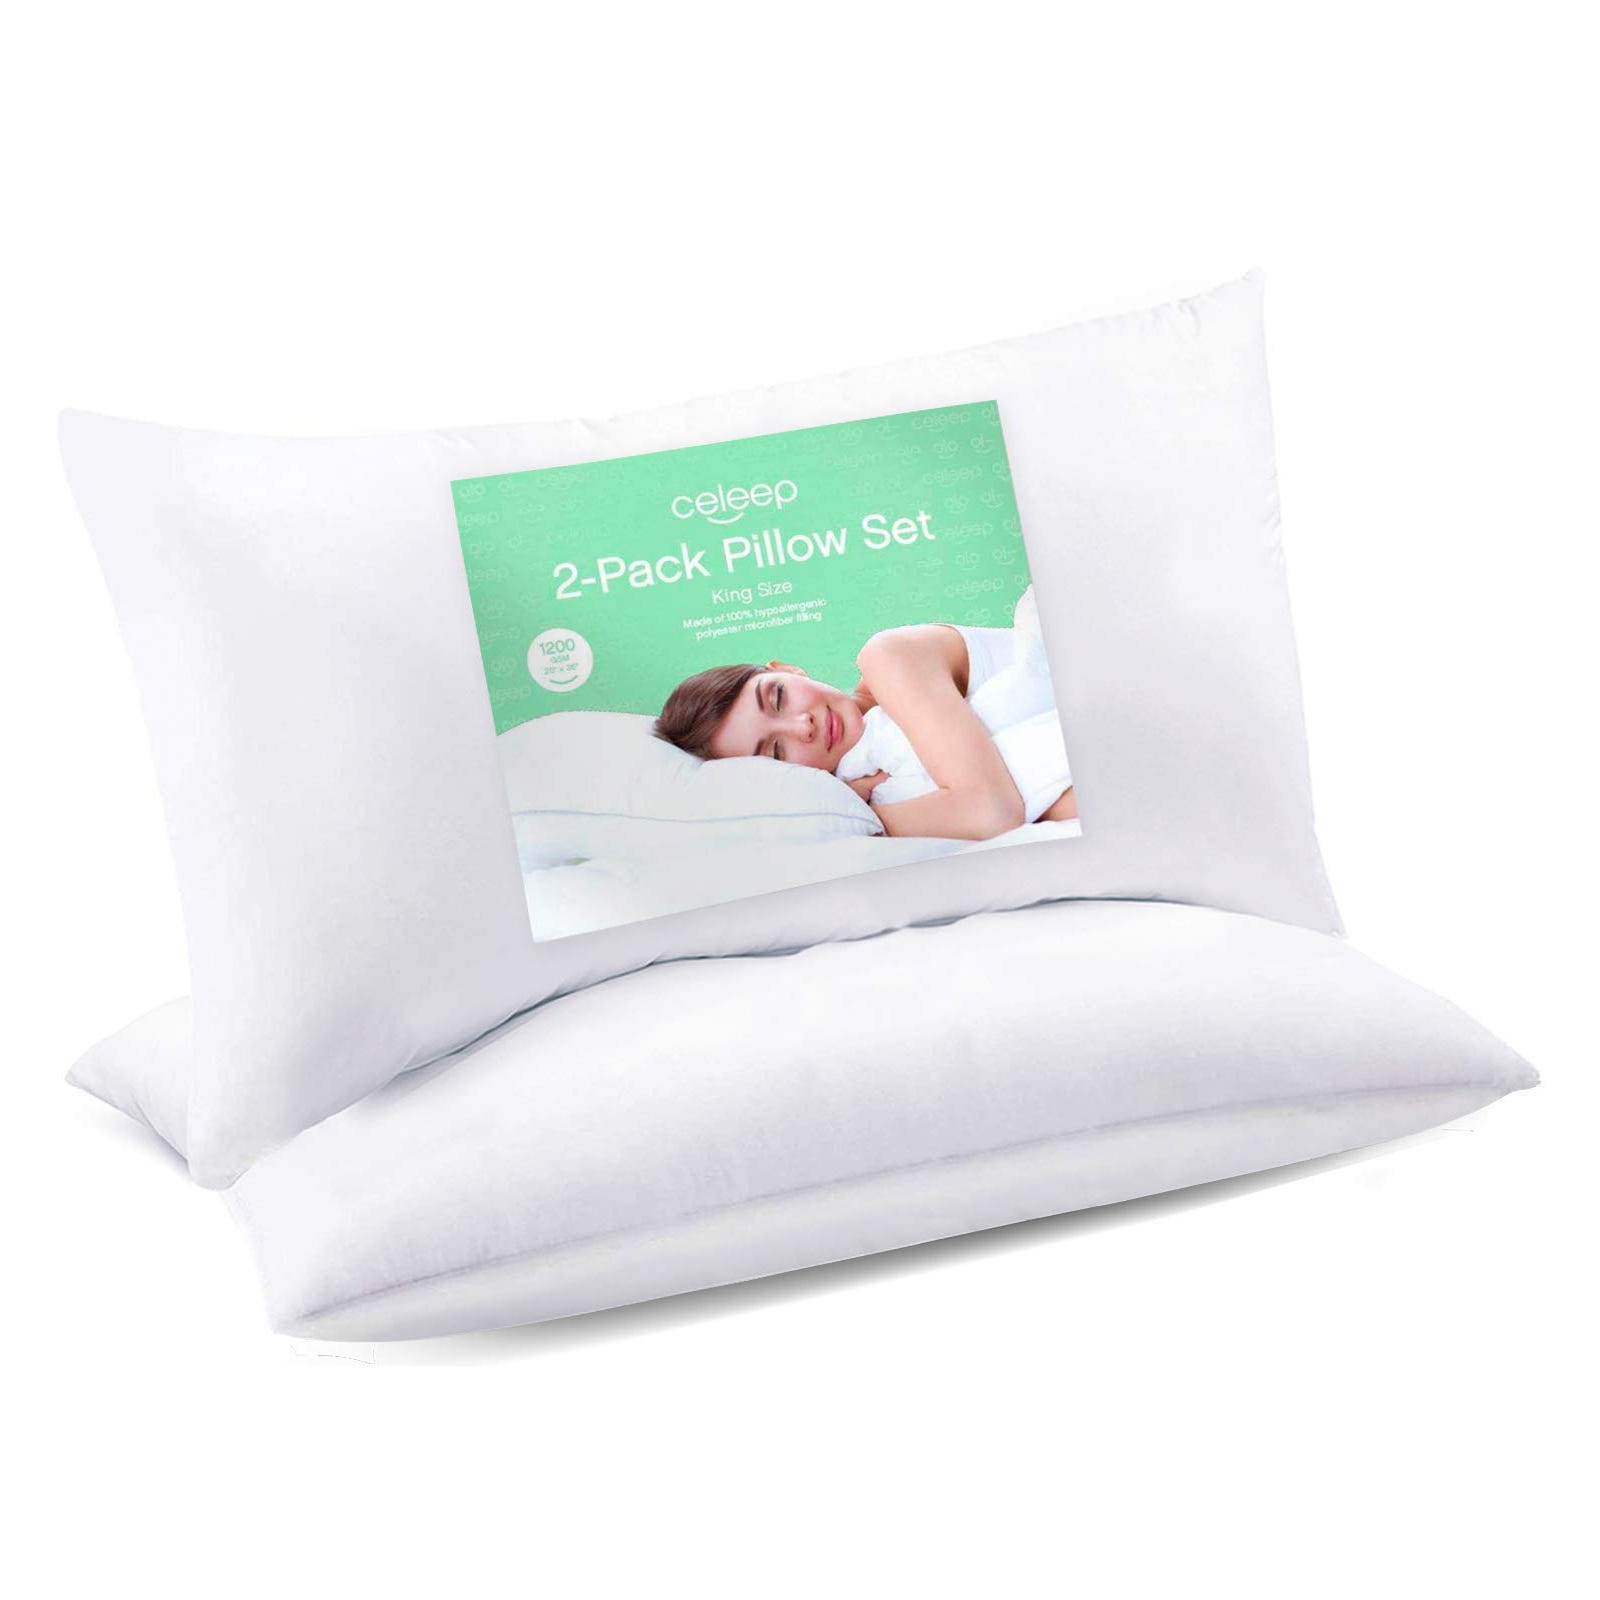 A two-pack of king size white pillows with a packaging label indicating the brand and set details.